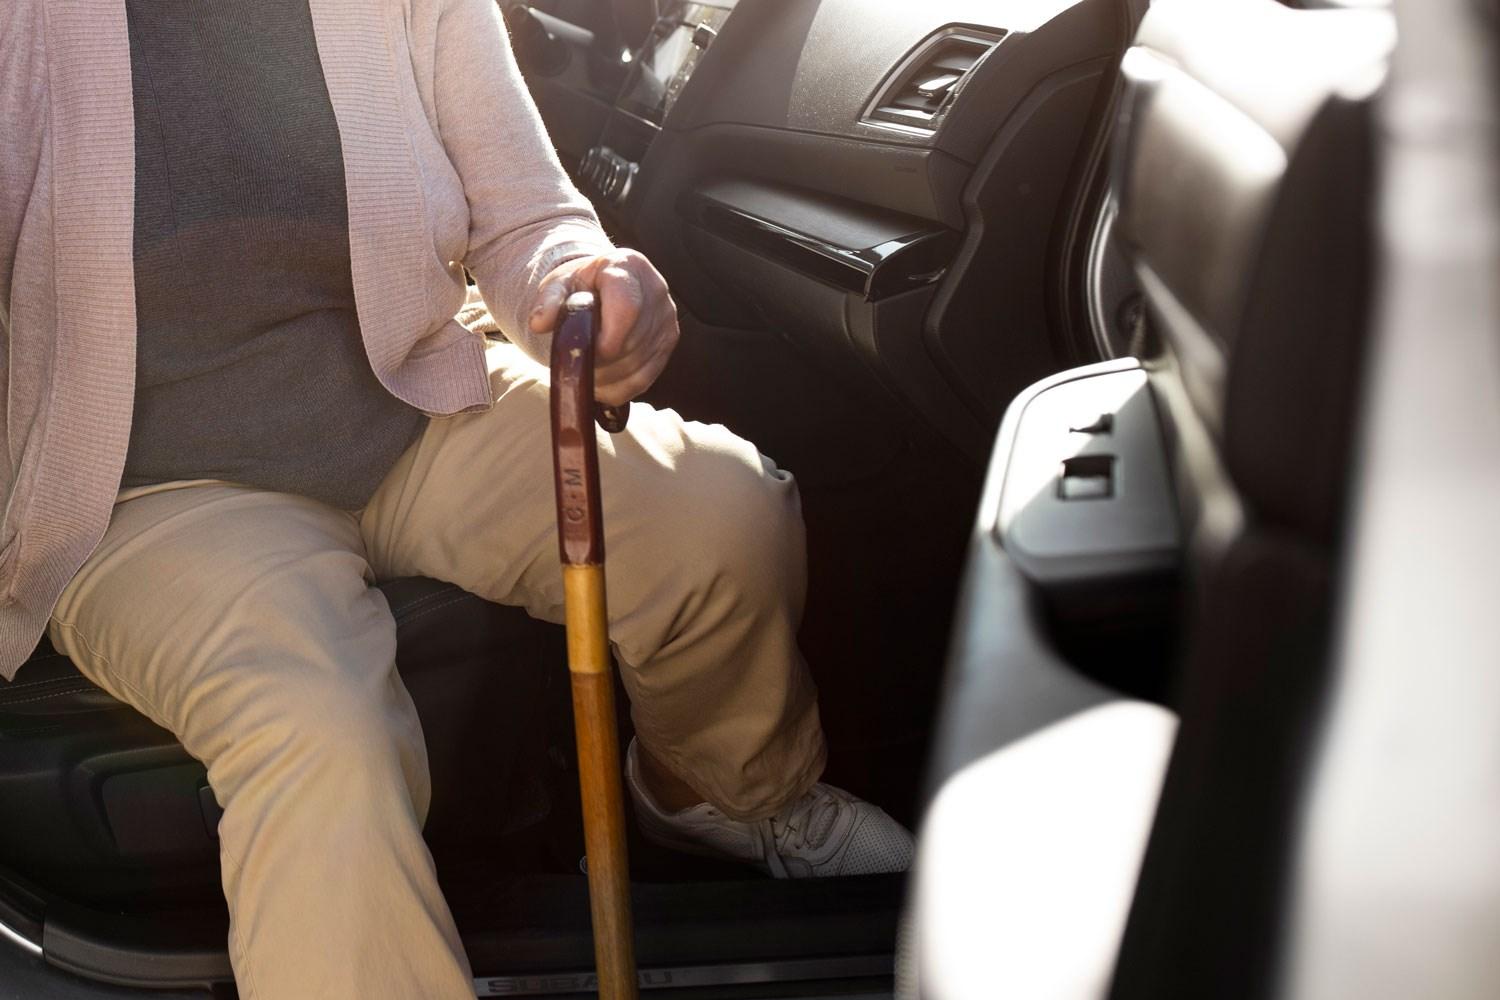 Elderly person uses walking aid to get out of the passenger side of a vehicle